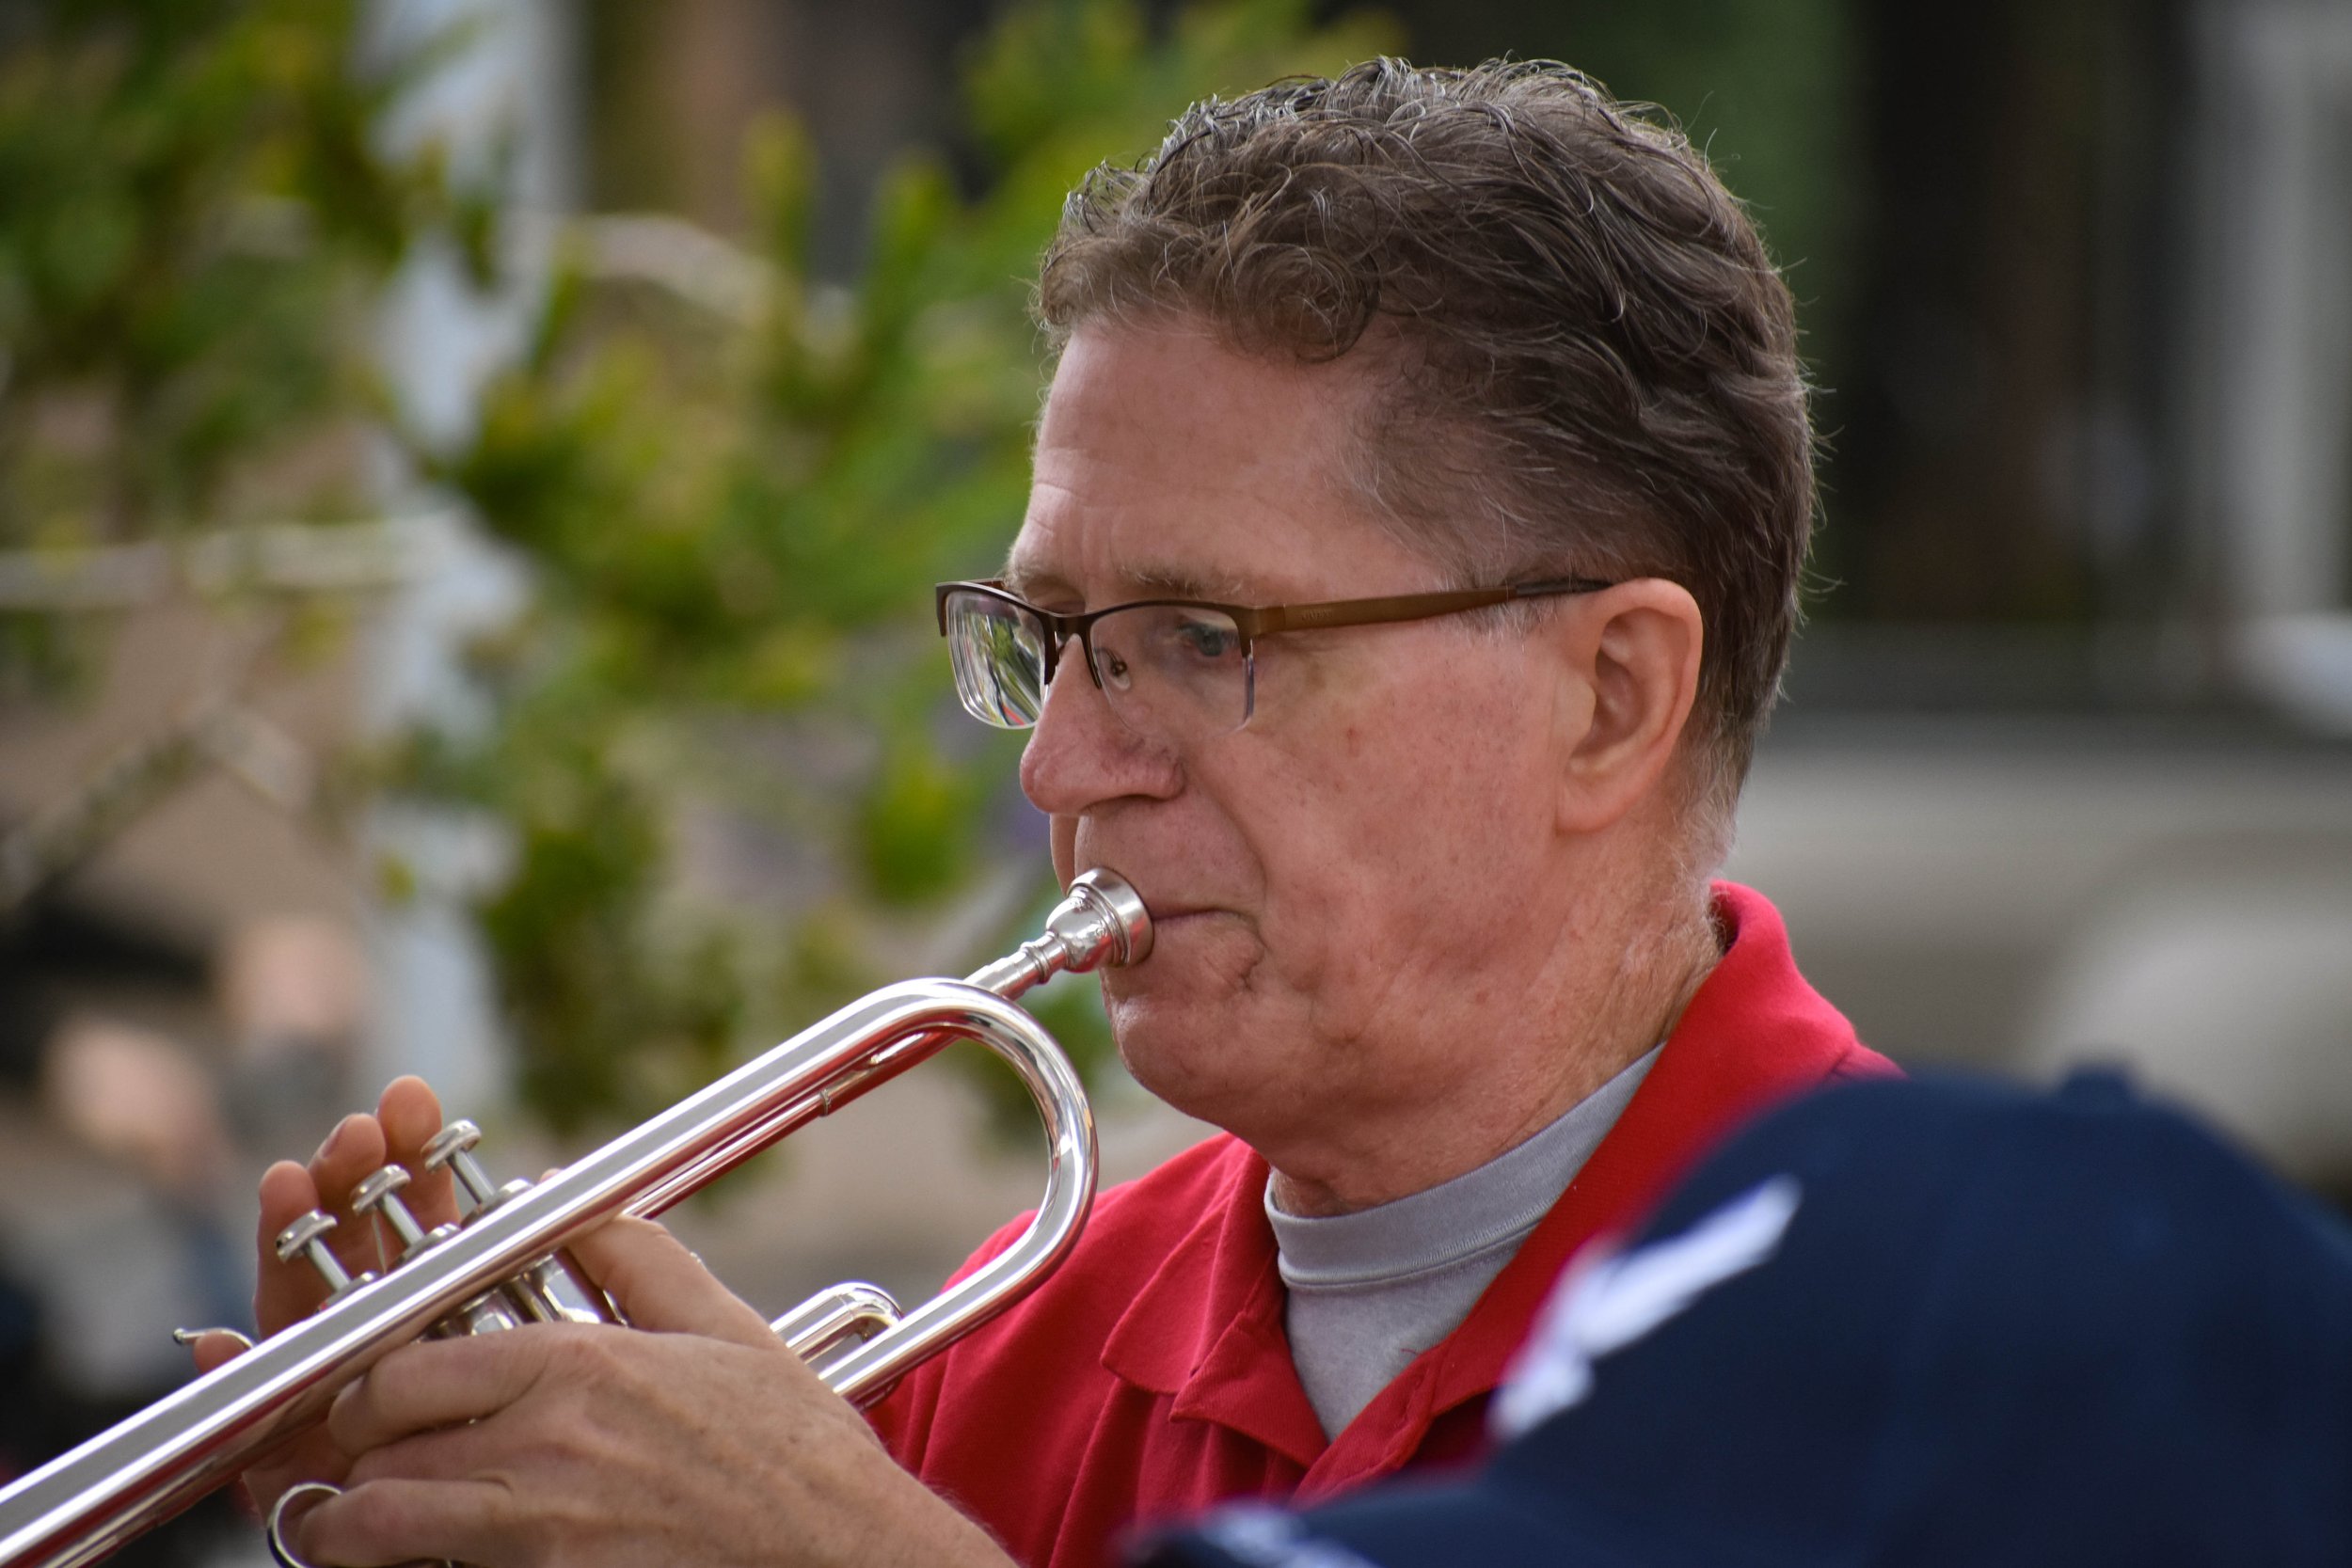 05-29-2023 LCCB and Jazz Band Memorial Day Concerts by Peyton Webster92-24.jpg